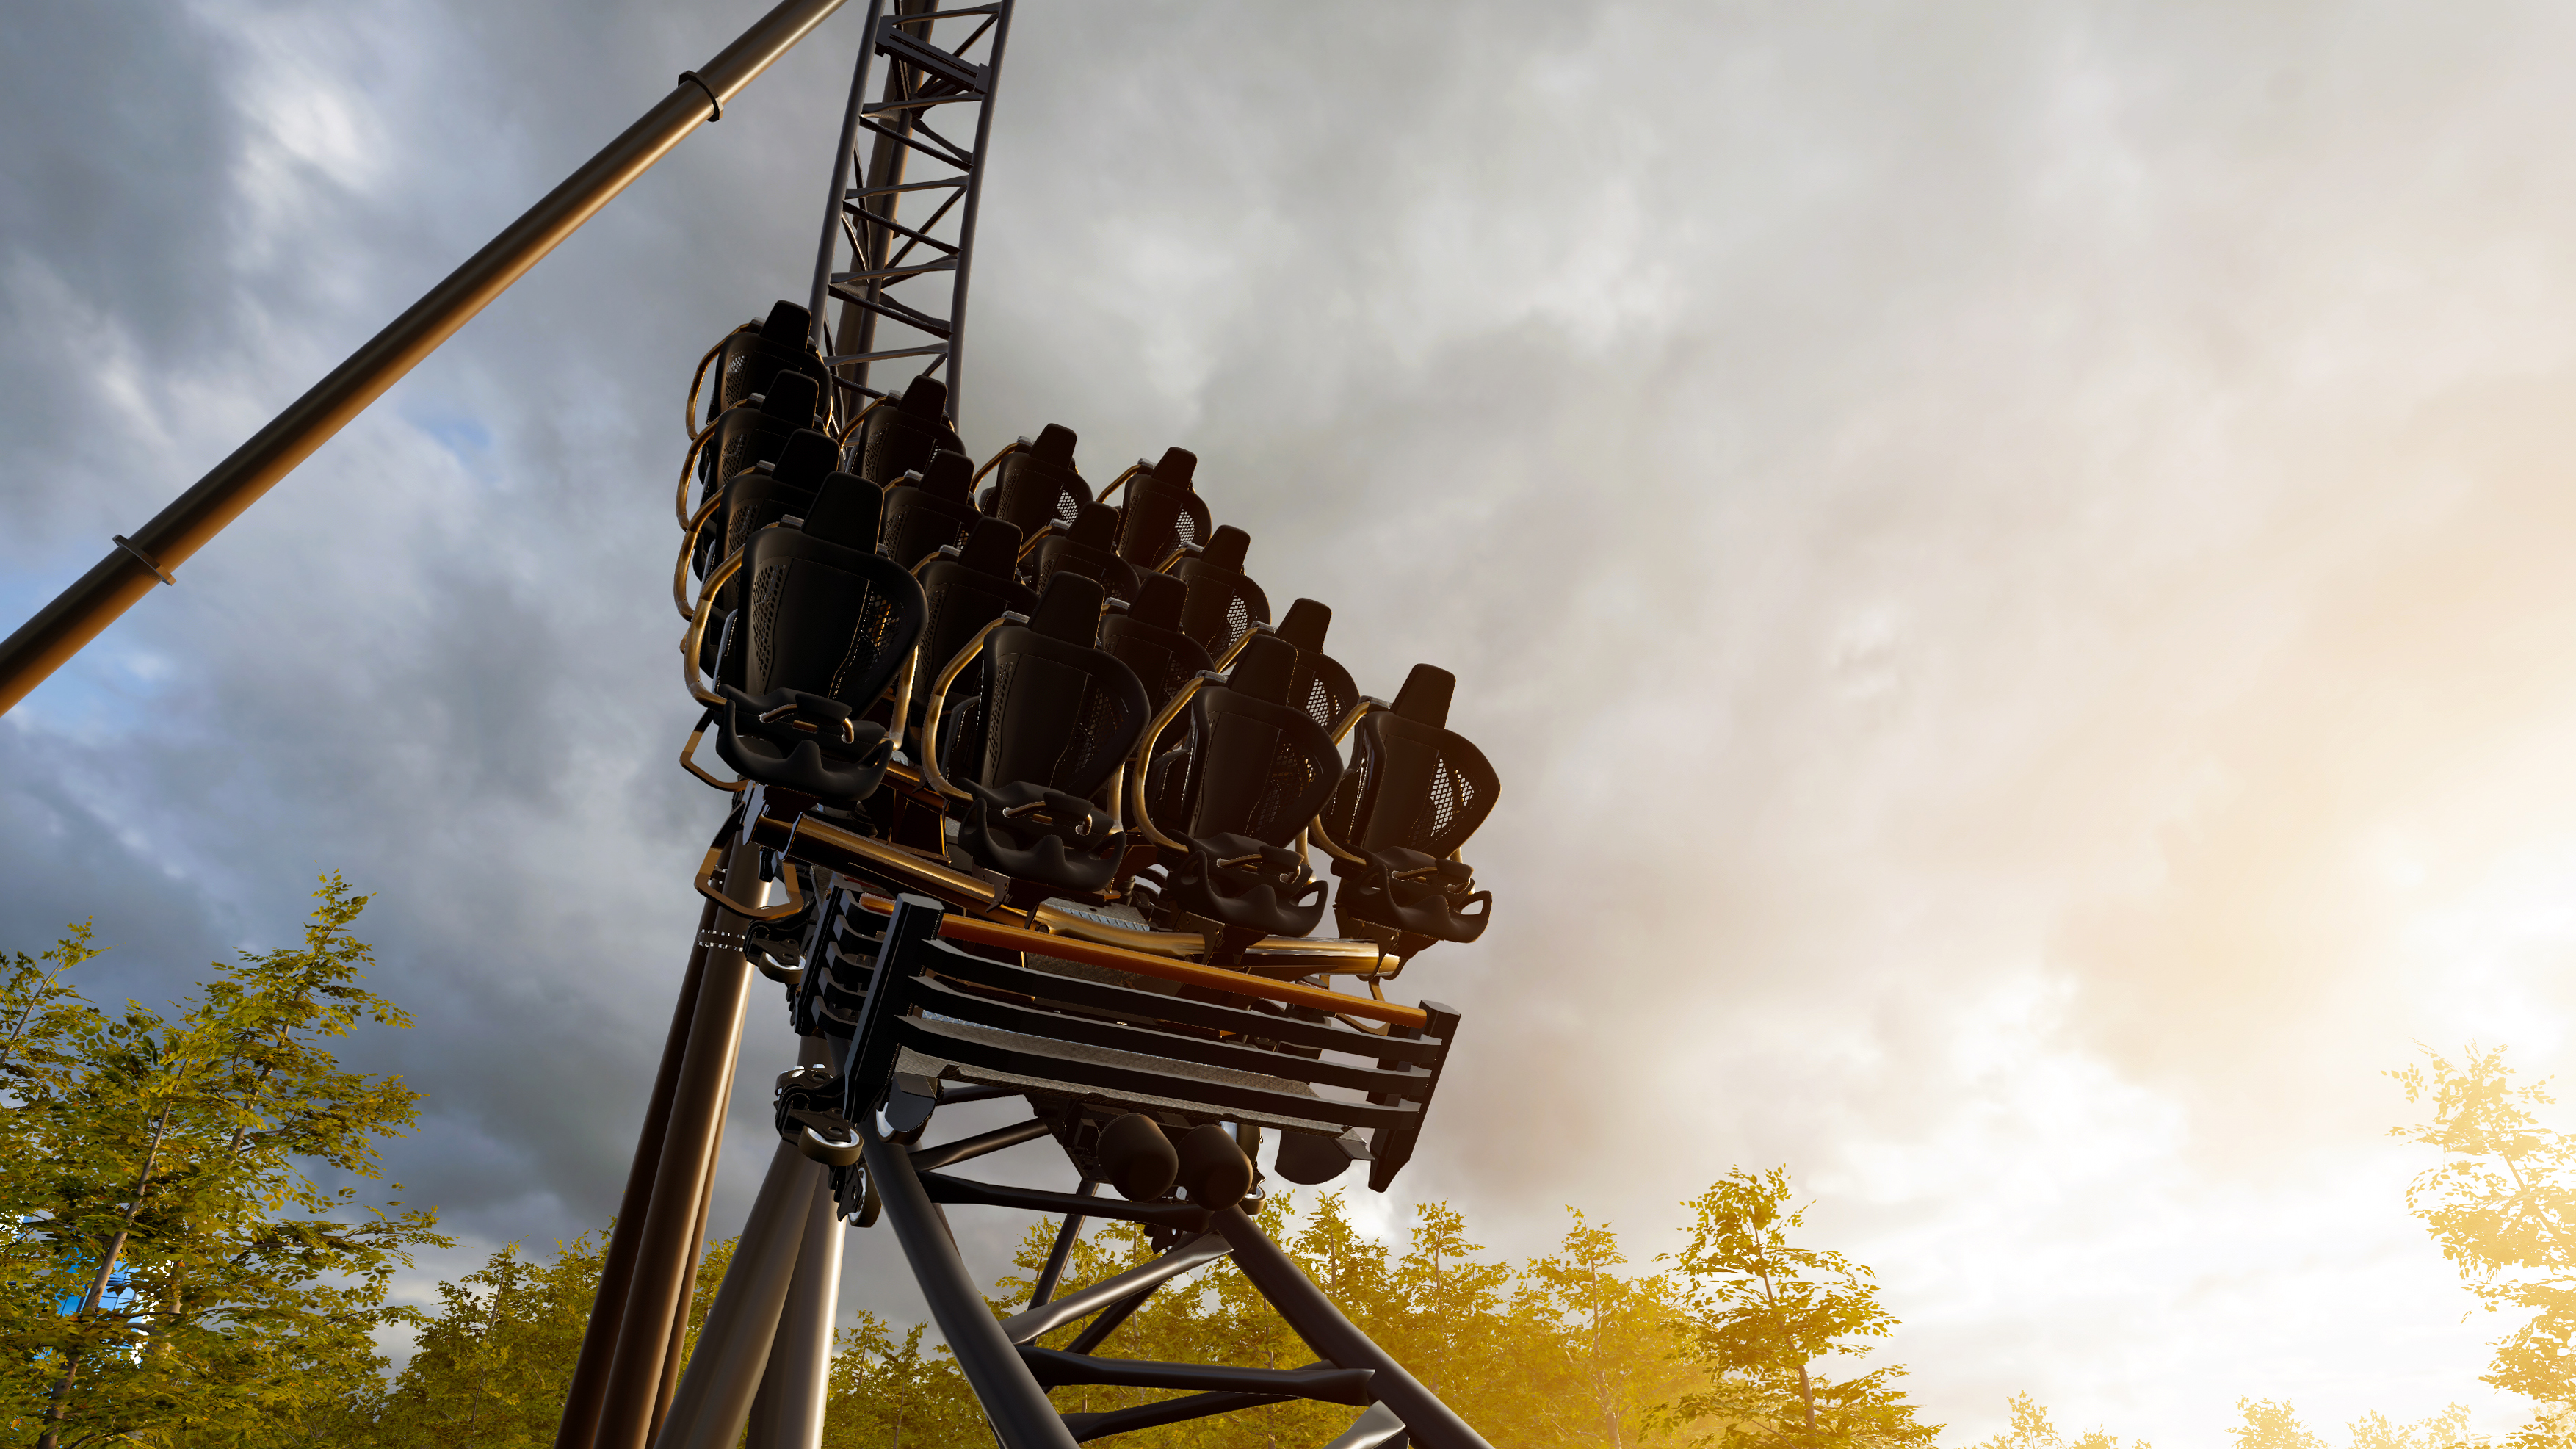 New Rollercoaster At Europa Park to open in 2023